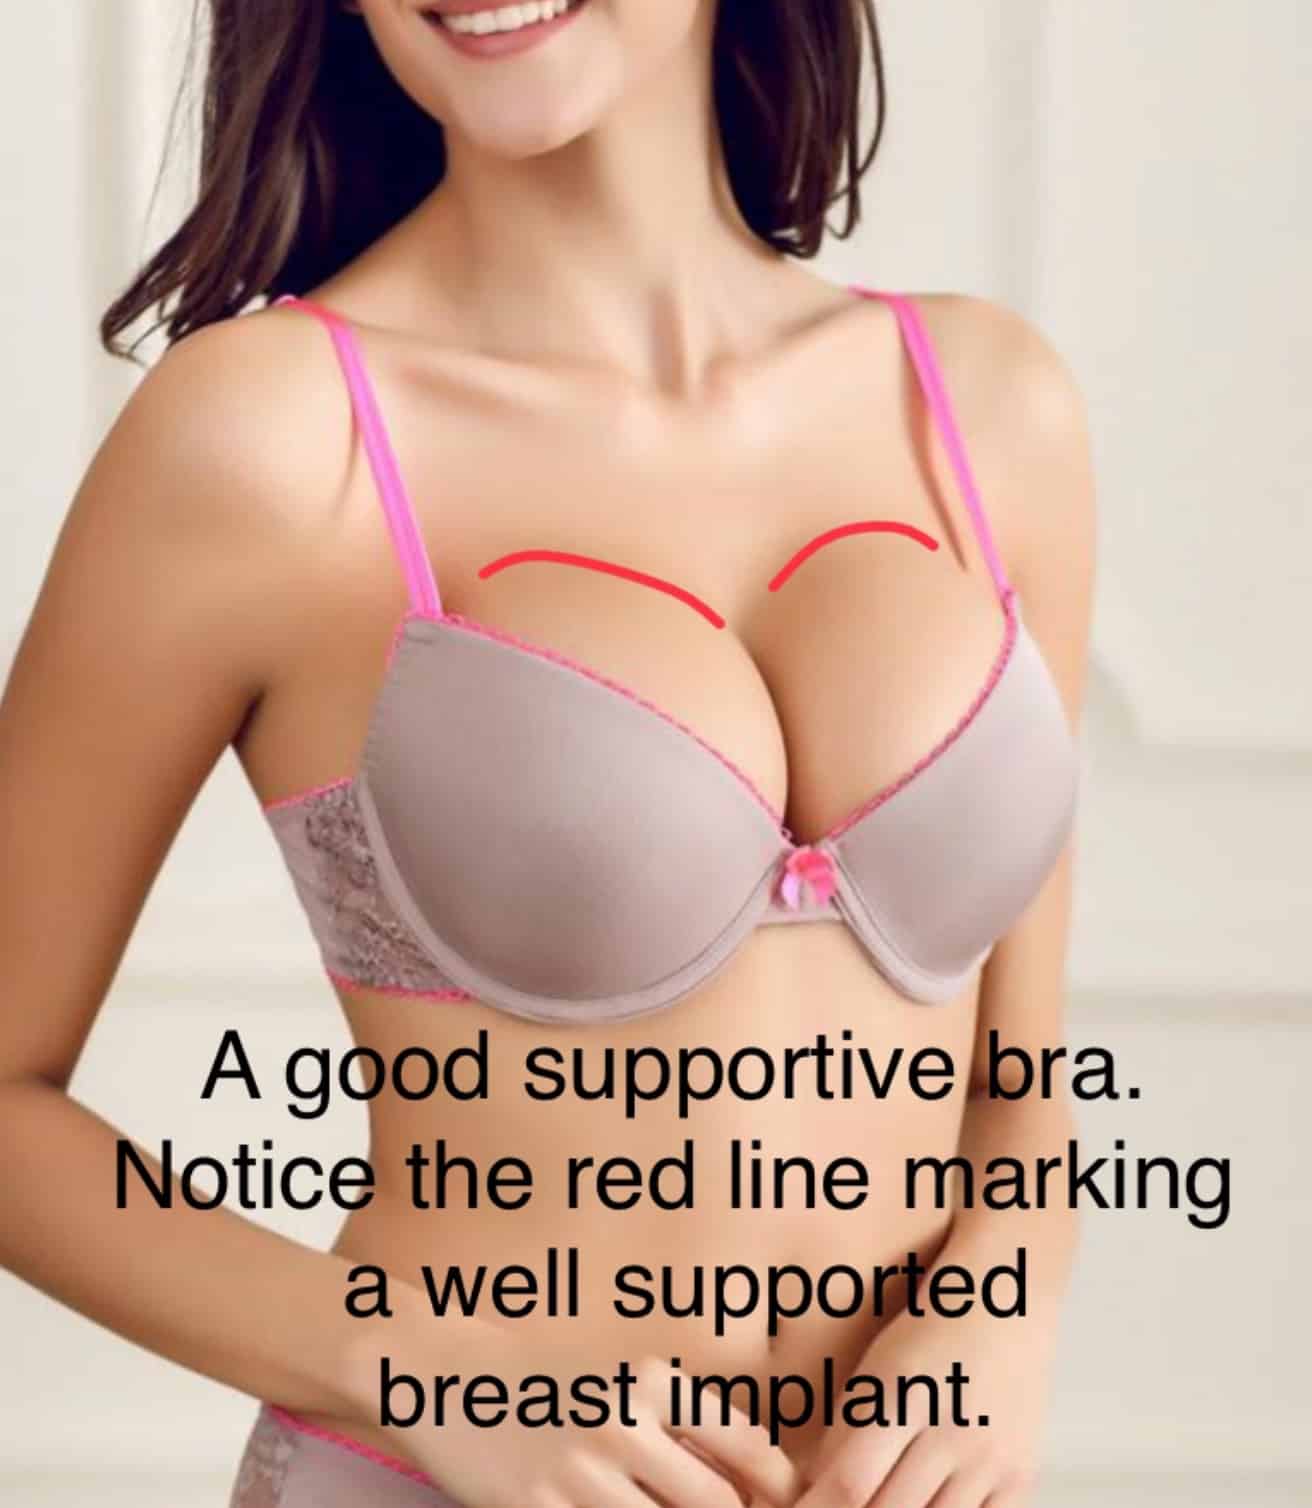 Chris Saunders MD  When Do I Wear a Bra after Breast Augmentation